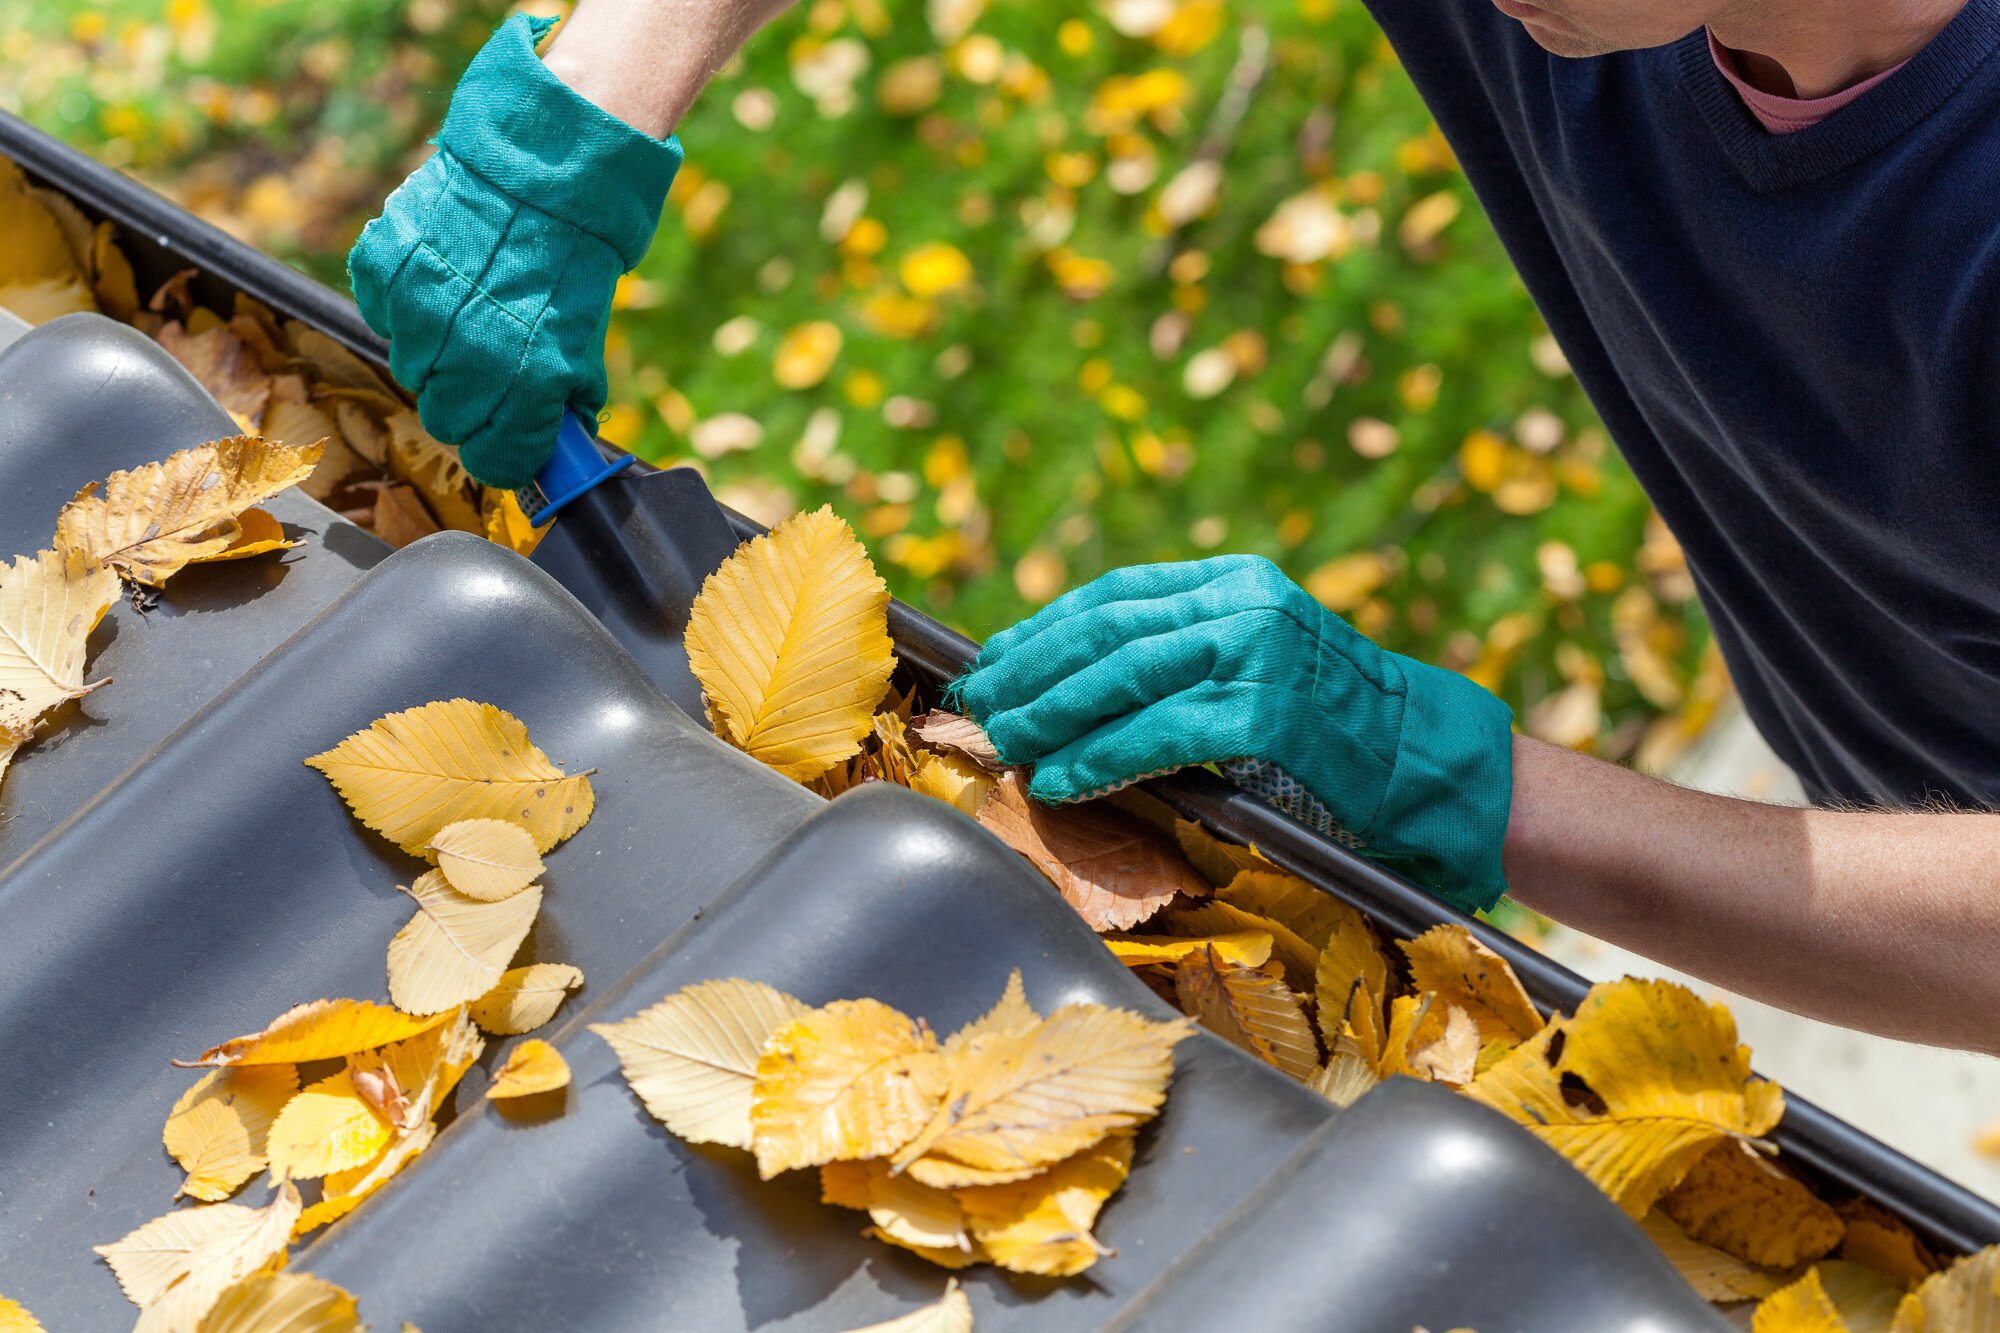 Regular maintenance will help to ensure your roof remains in good condition. See our roof maintenance tips for new homeowners to keep your roof in top shape.